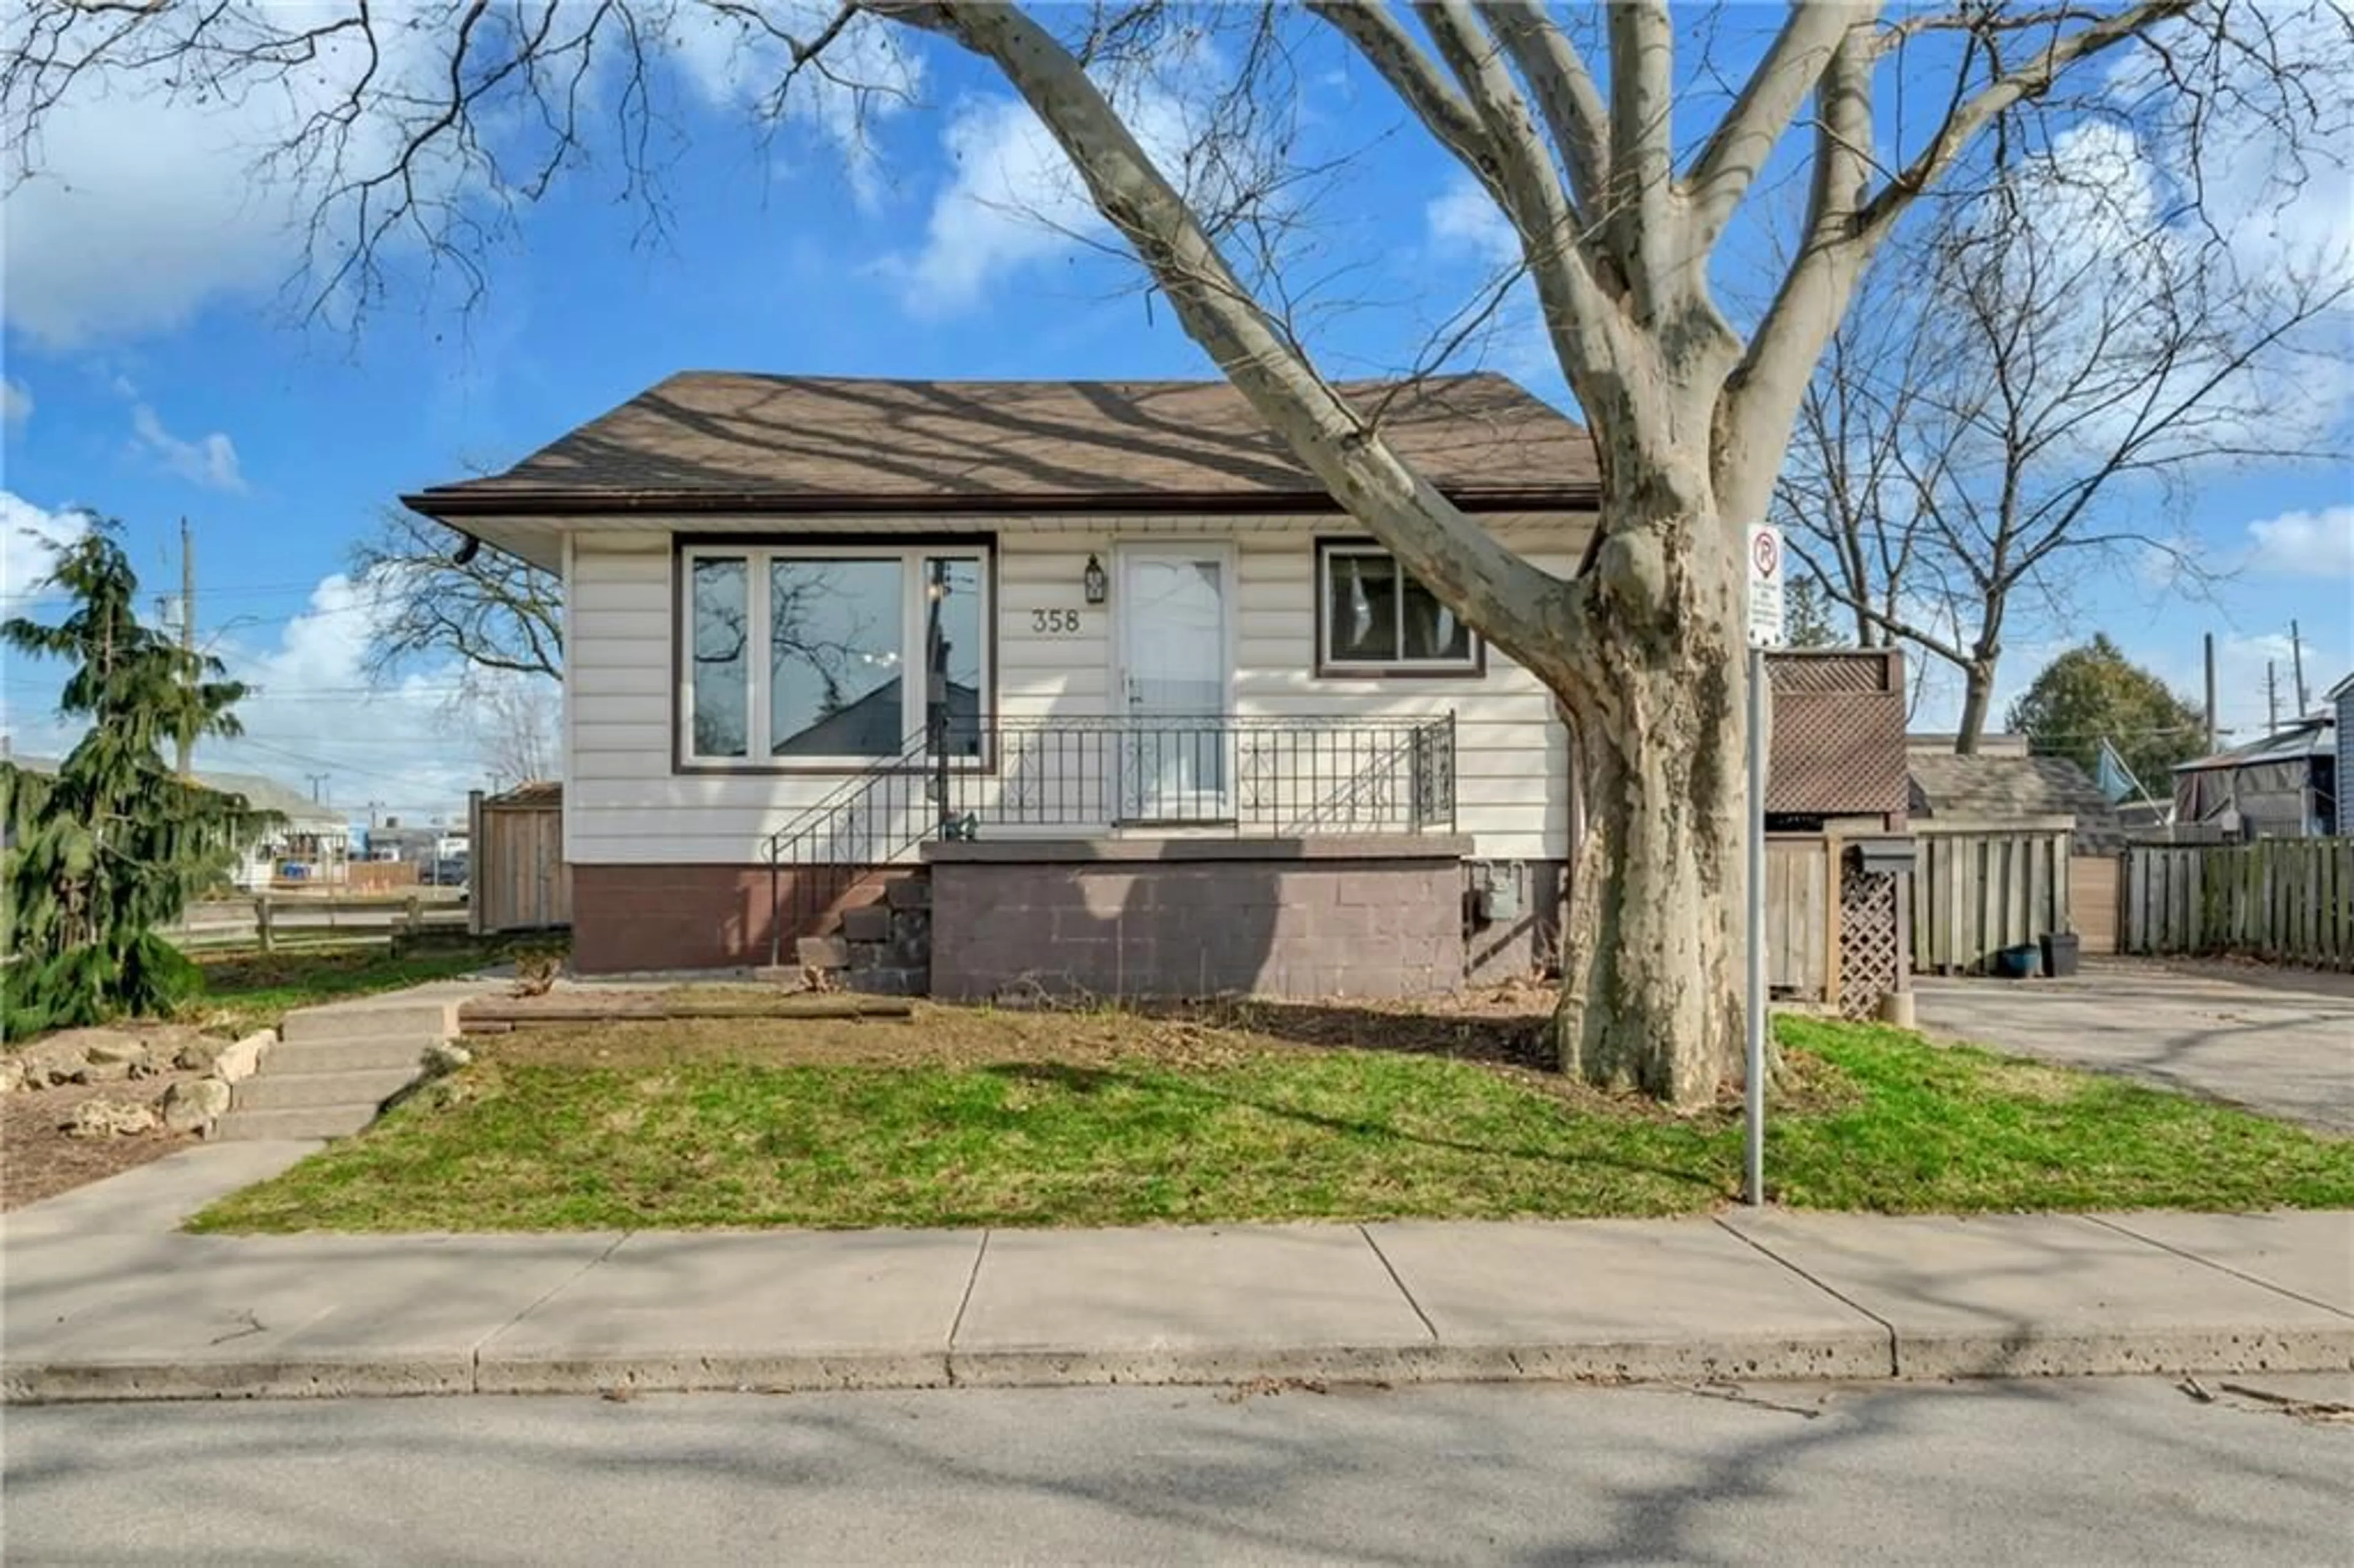 Frontside or backside of a home for 358 Guelph St, Hamilton Ontario L8H 3C7